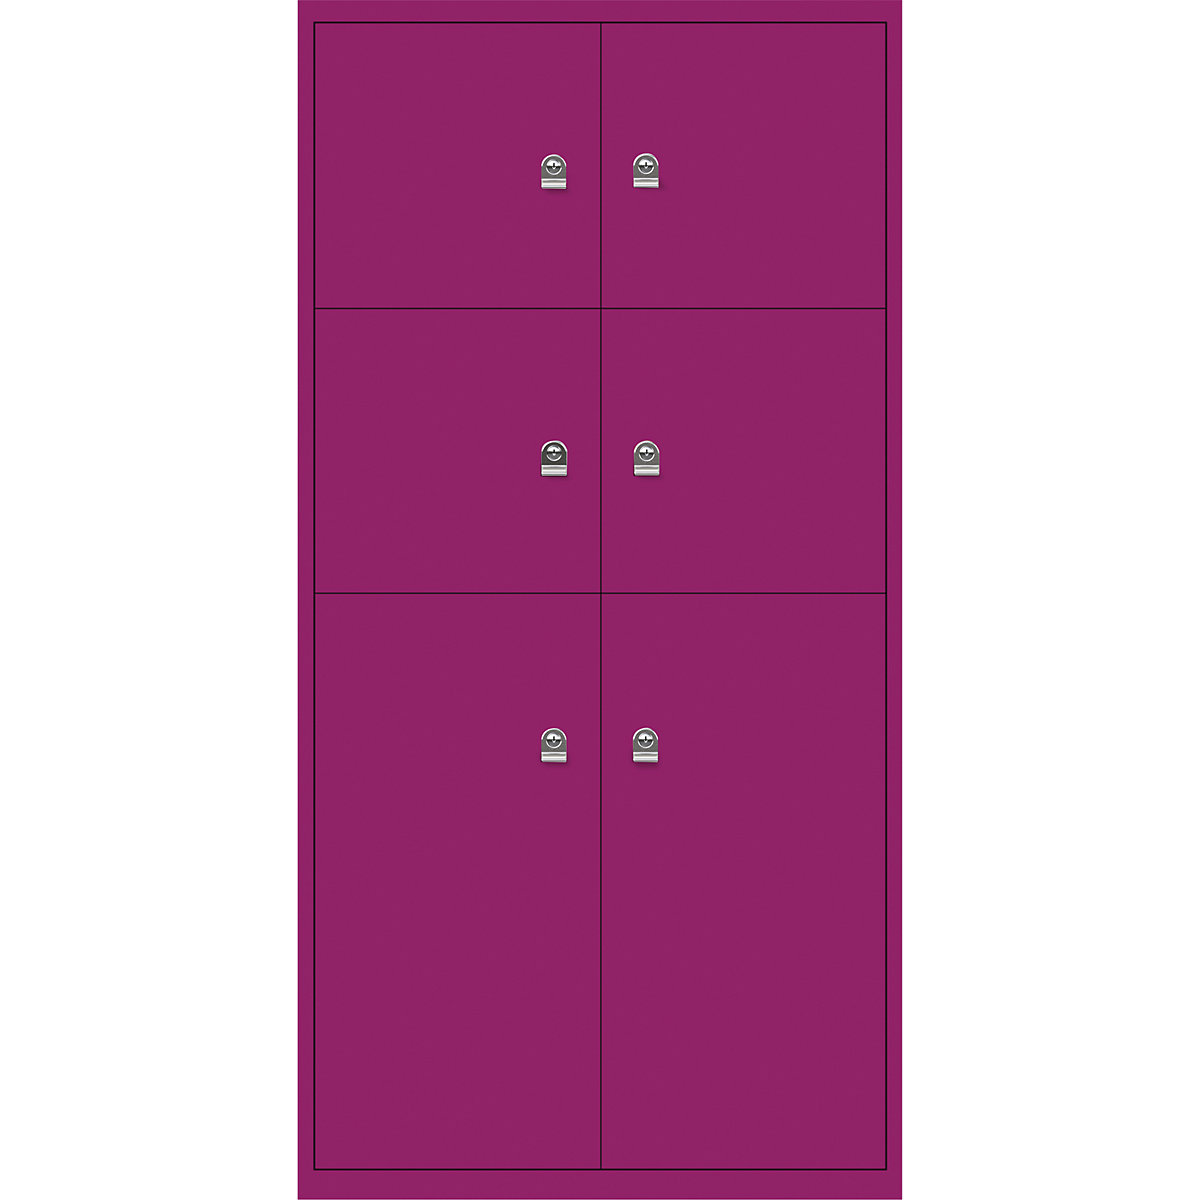 LateralFile™ lodge – BISLEY, with 6 lockable compartments, height 4 x 375 mm, 2 x 755 mm, fuchsia-14